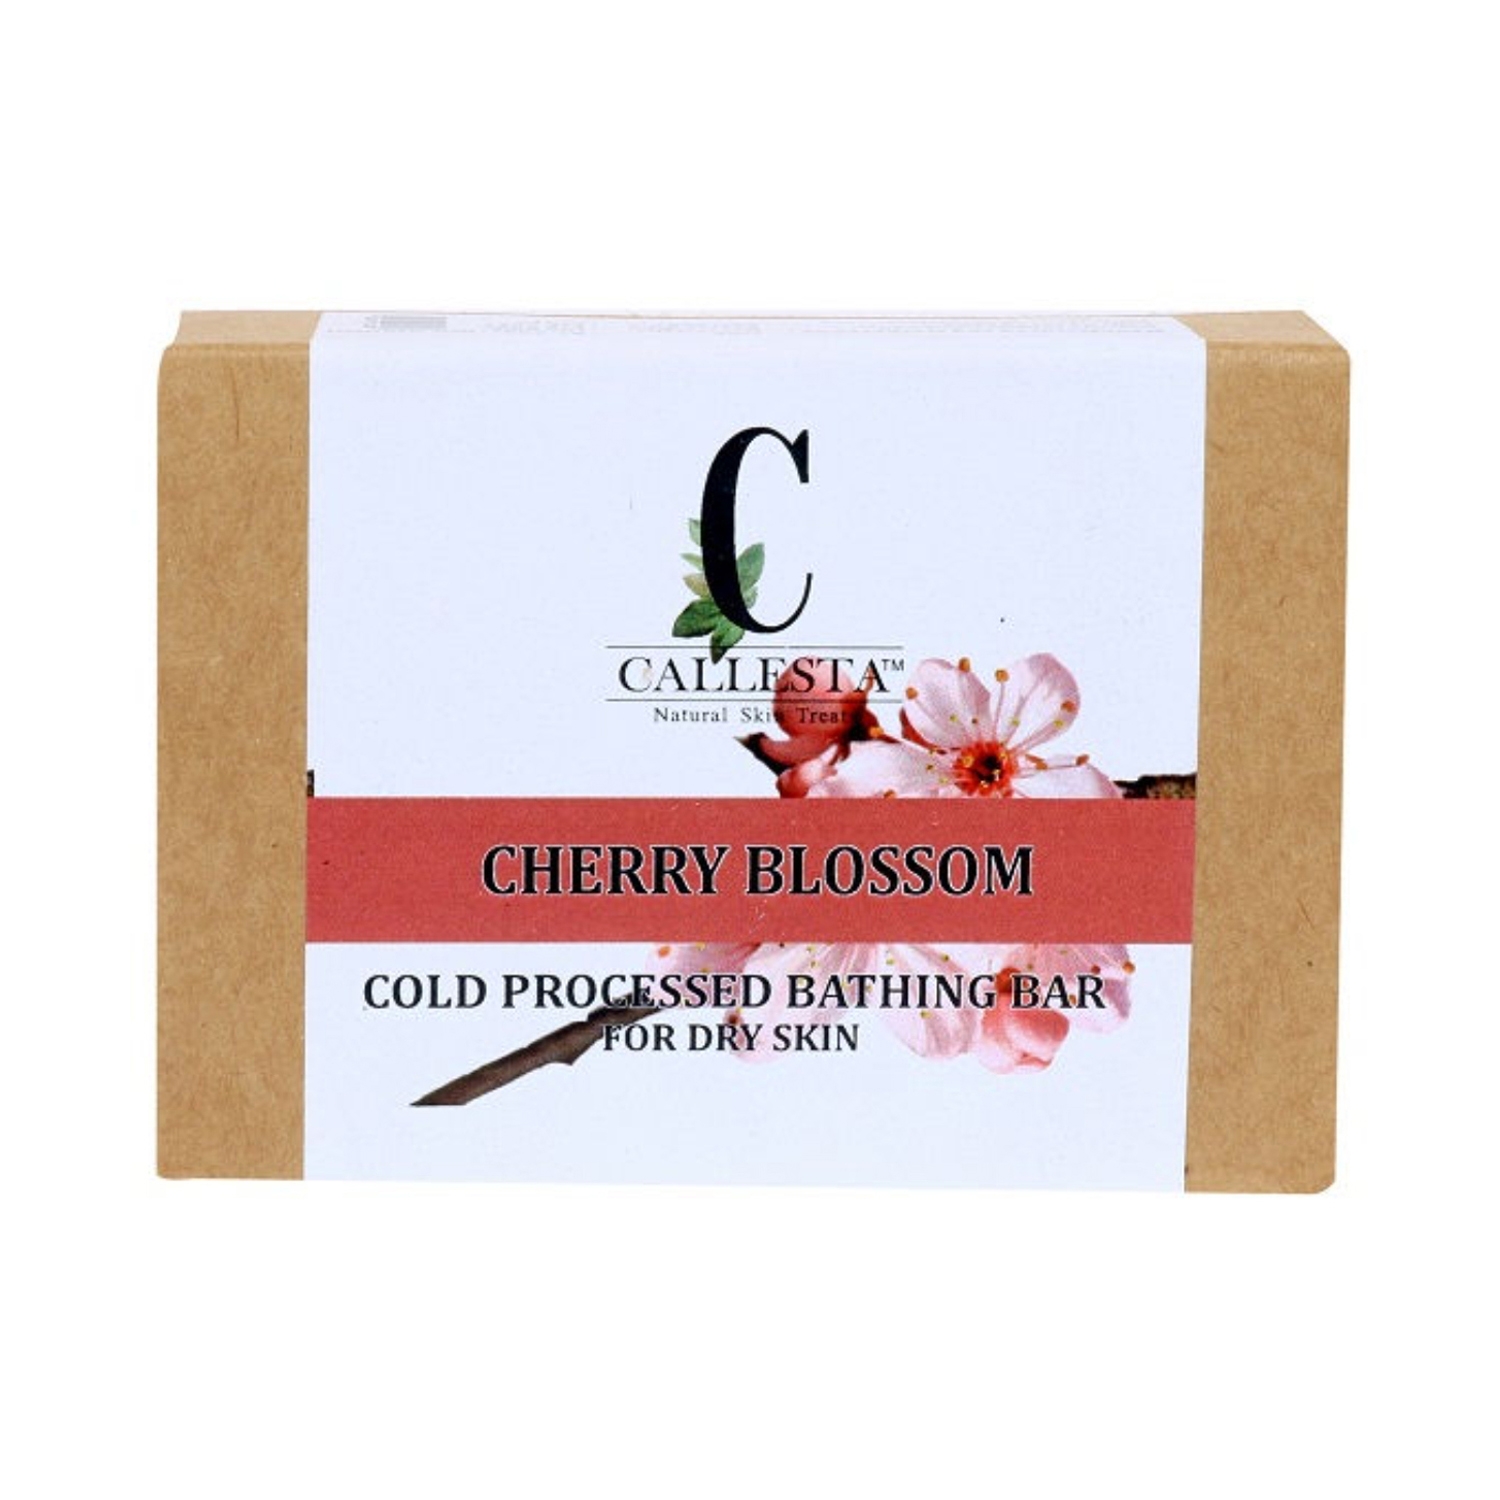 Callesta Cherry Blossom Cold Processed Bathing Bar (100g)